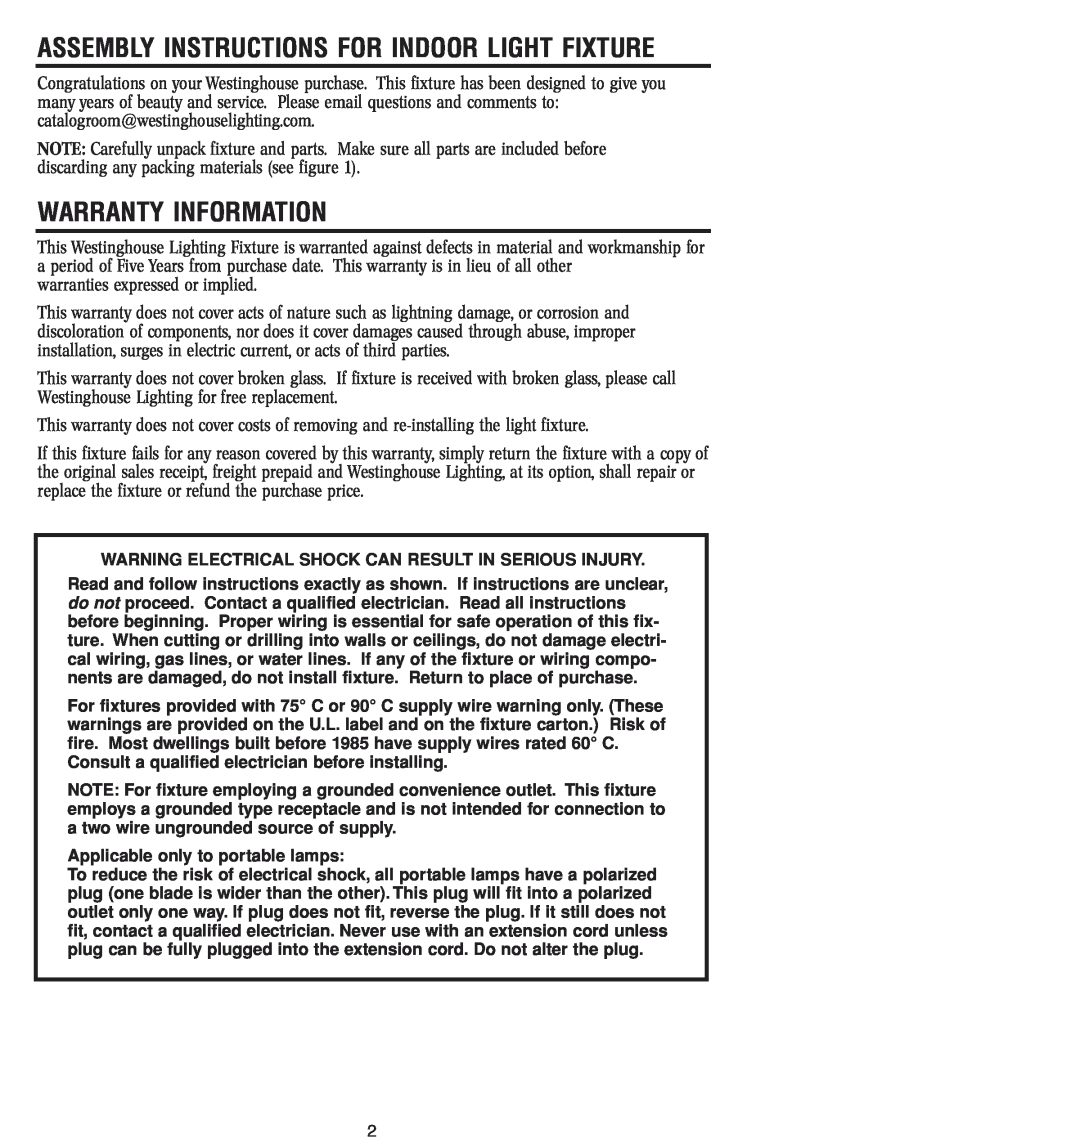 Westinghouse W-045 owner manual Warranty Information, Assembly Instructions For Indoor Light Fixture 